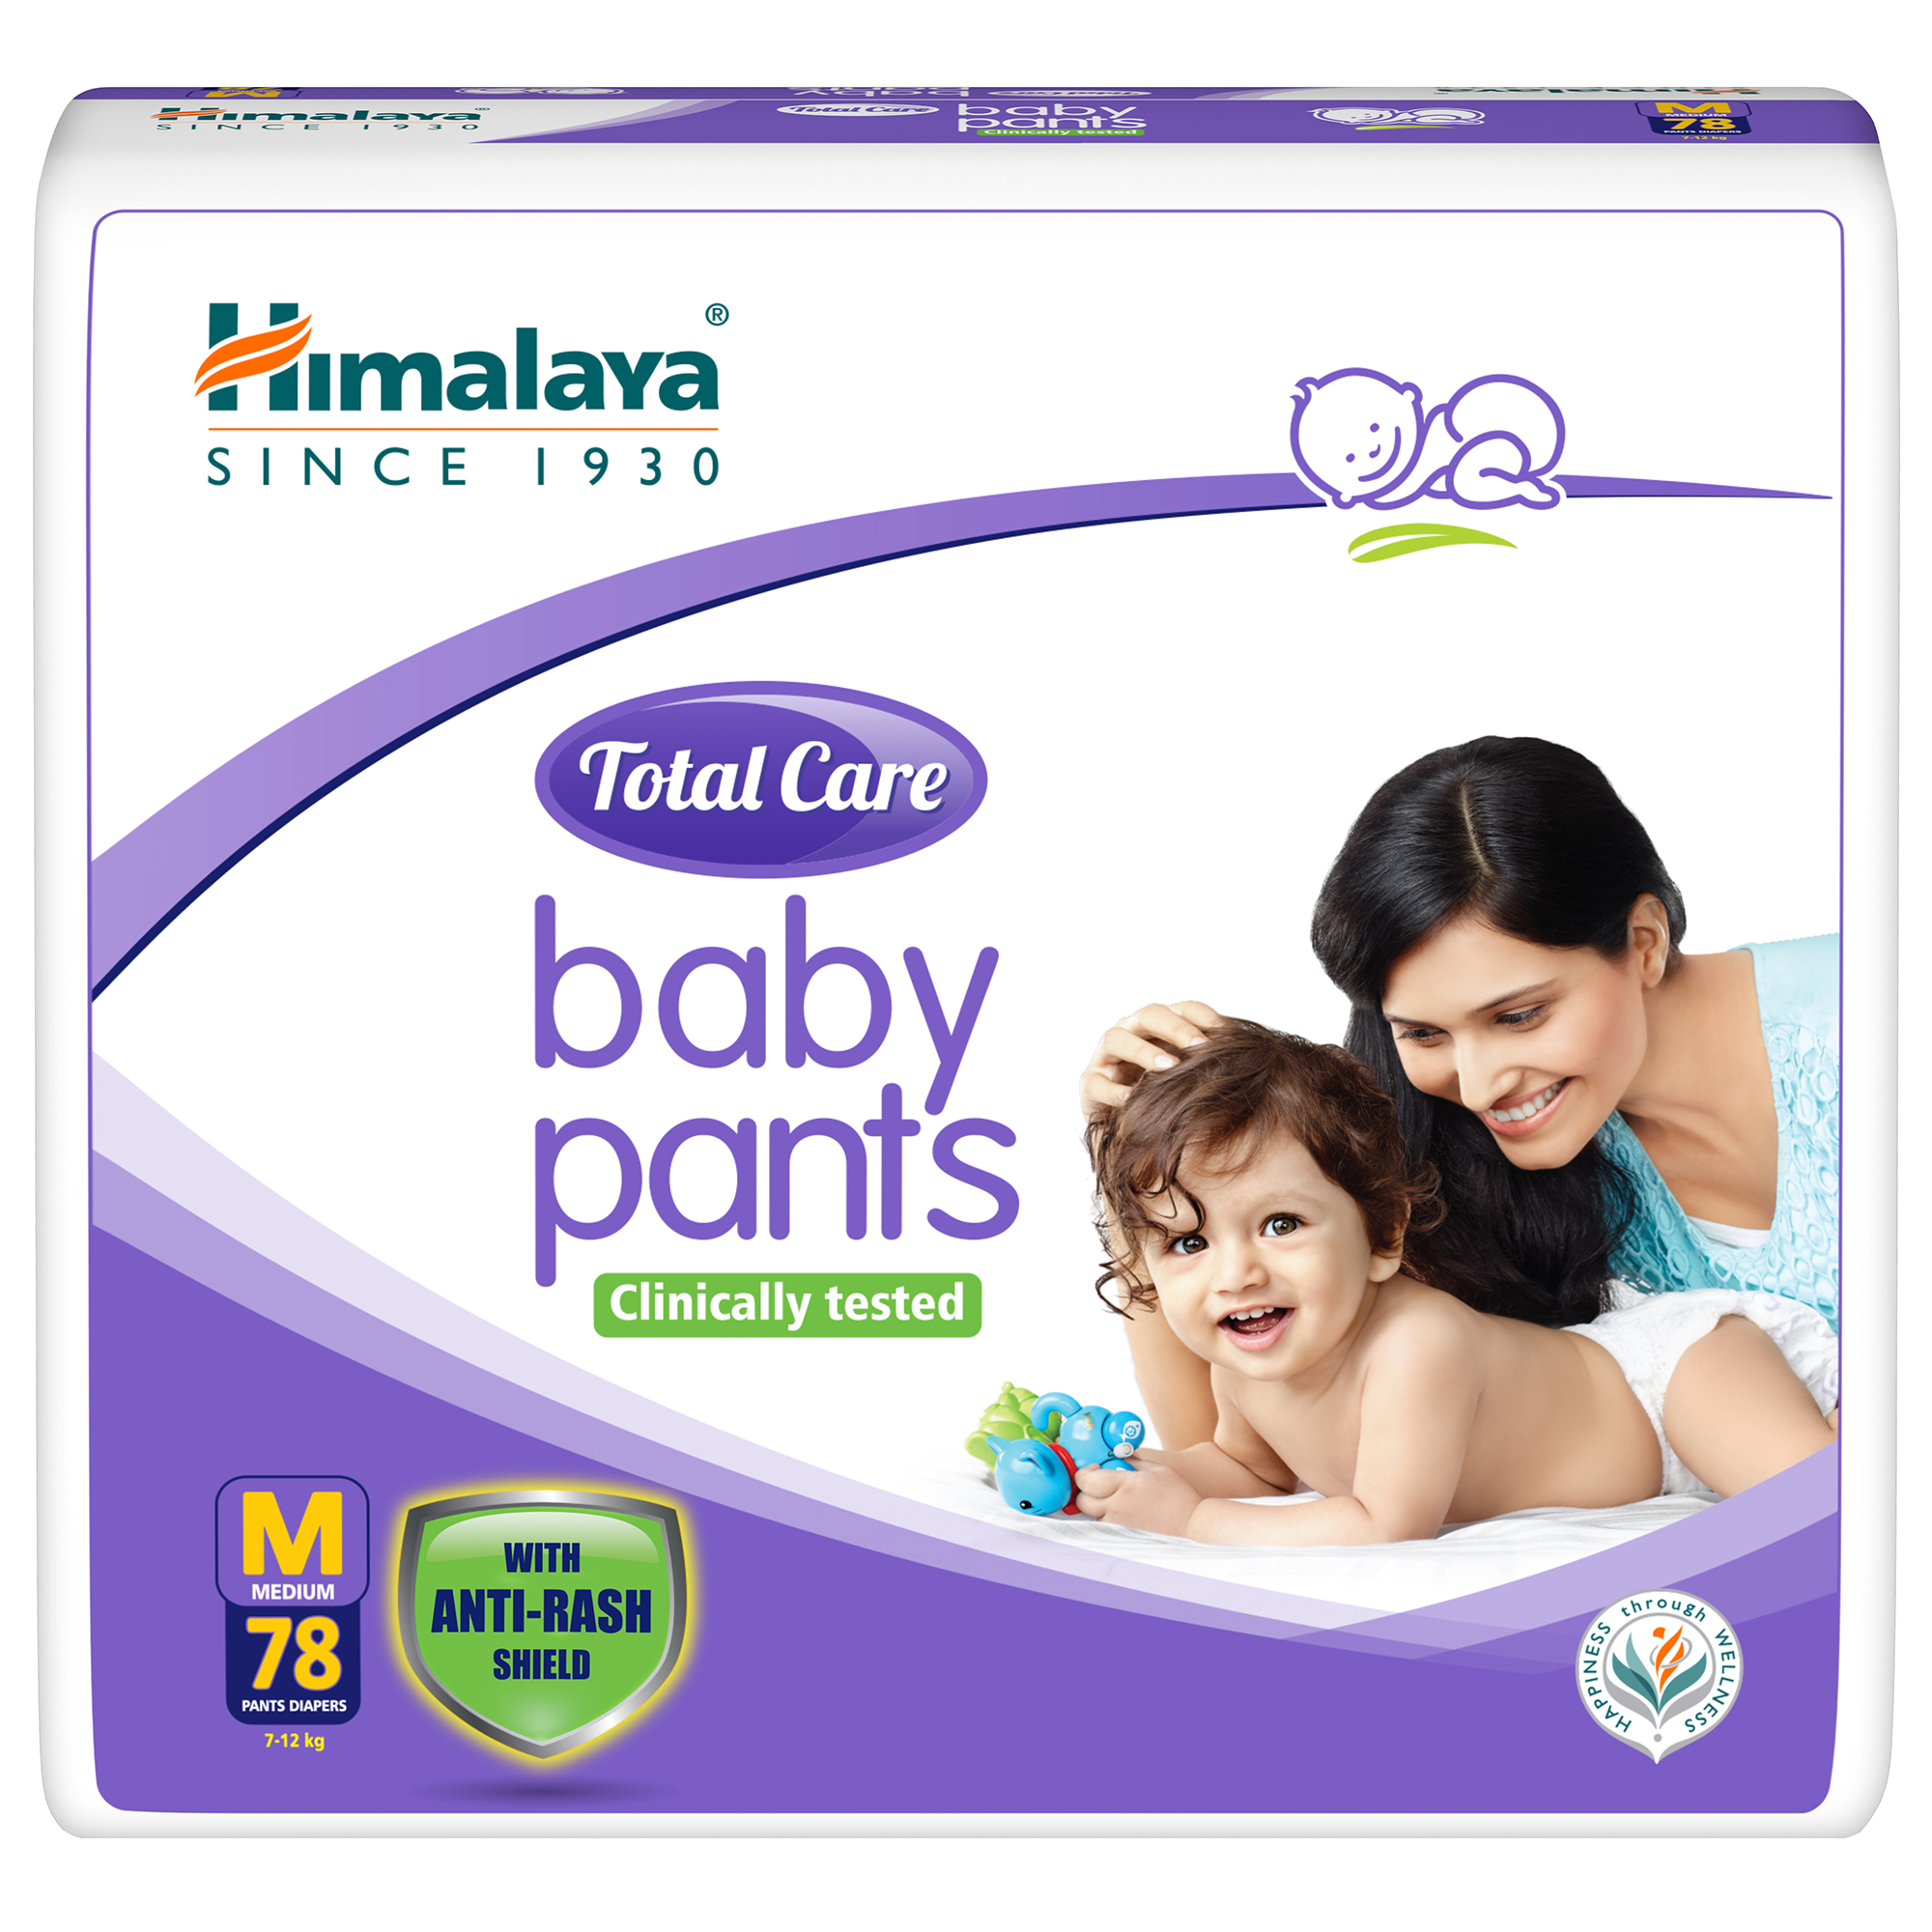 Total Care baby pants